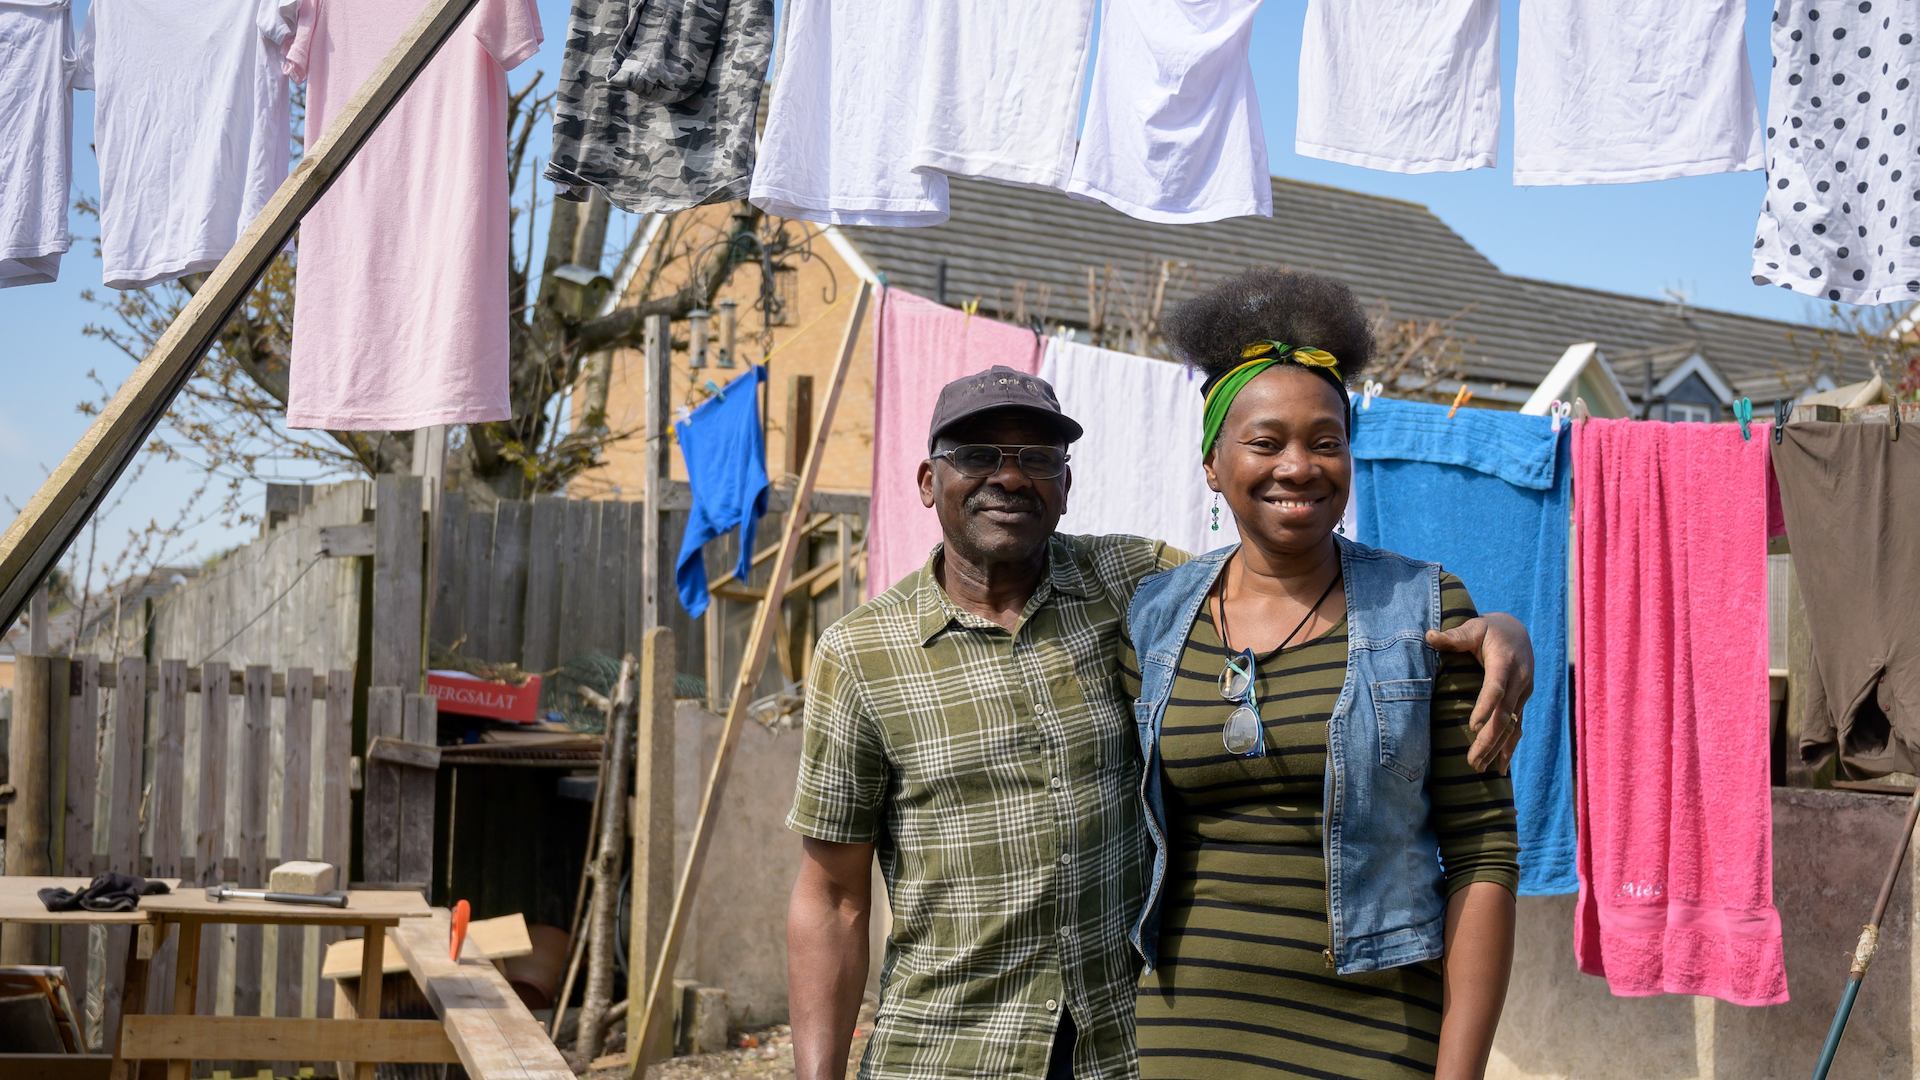 Older man and younger woman smiling in the garden in front of a washing line